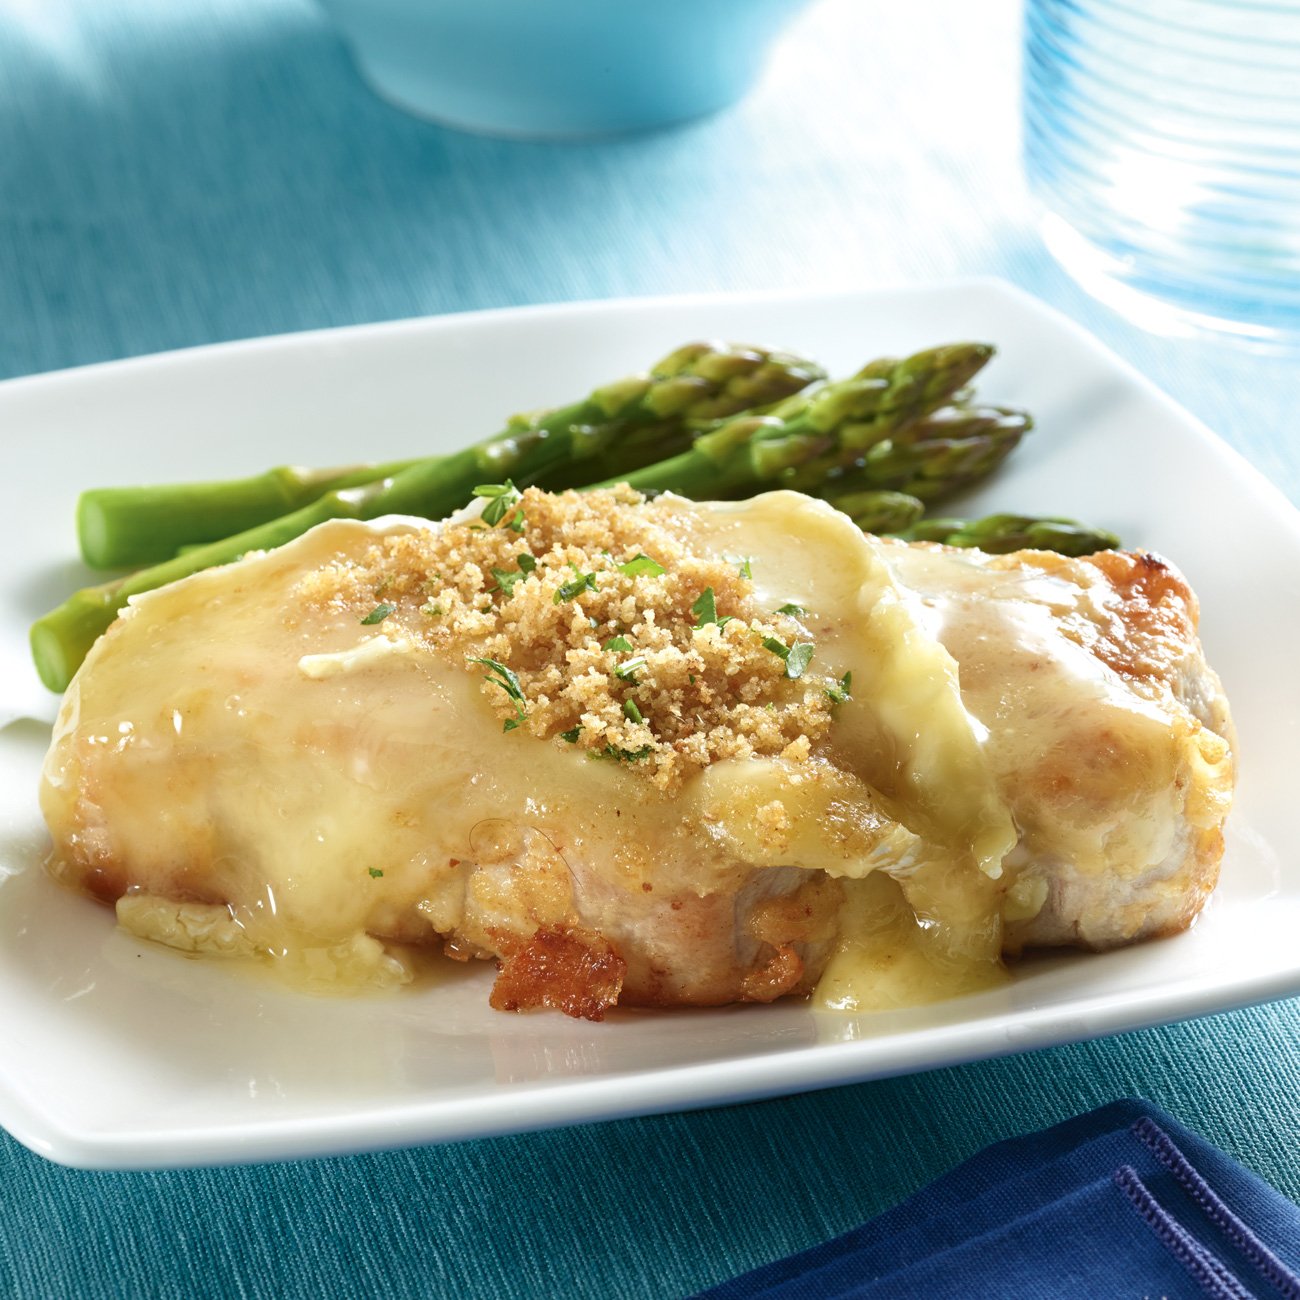 Mustard-Baked Pork Chops With Brie Recipe from H-E-B